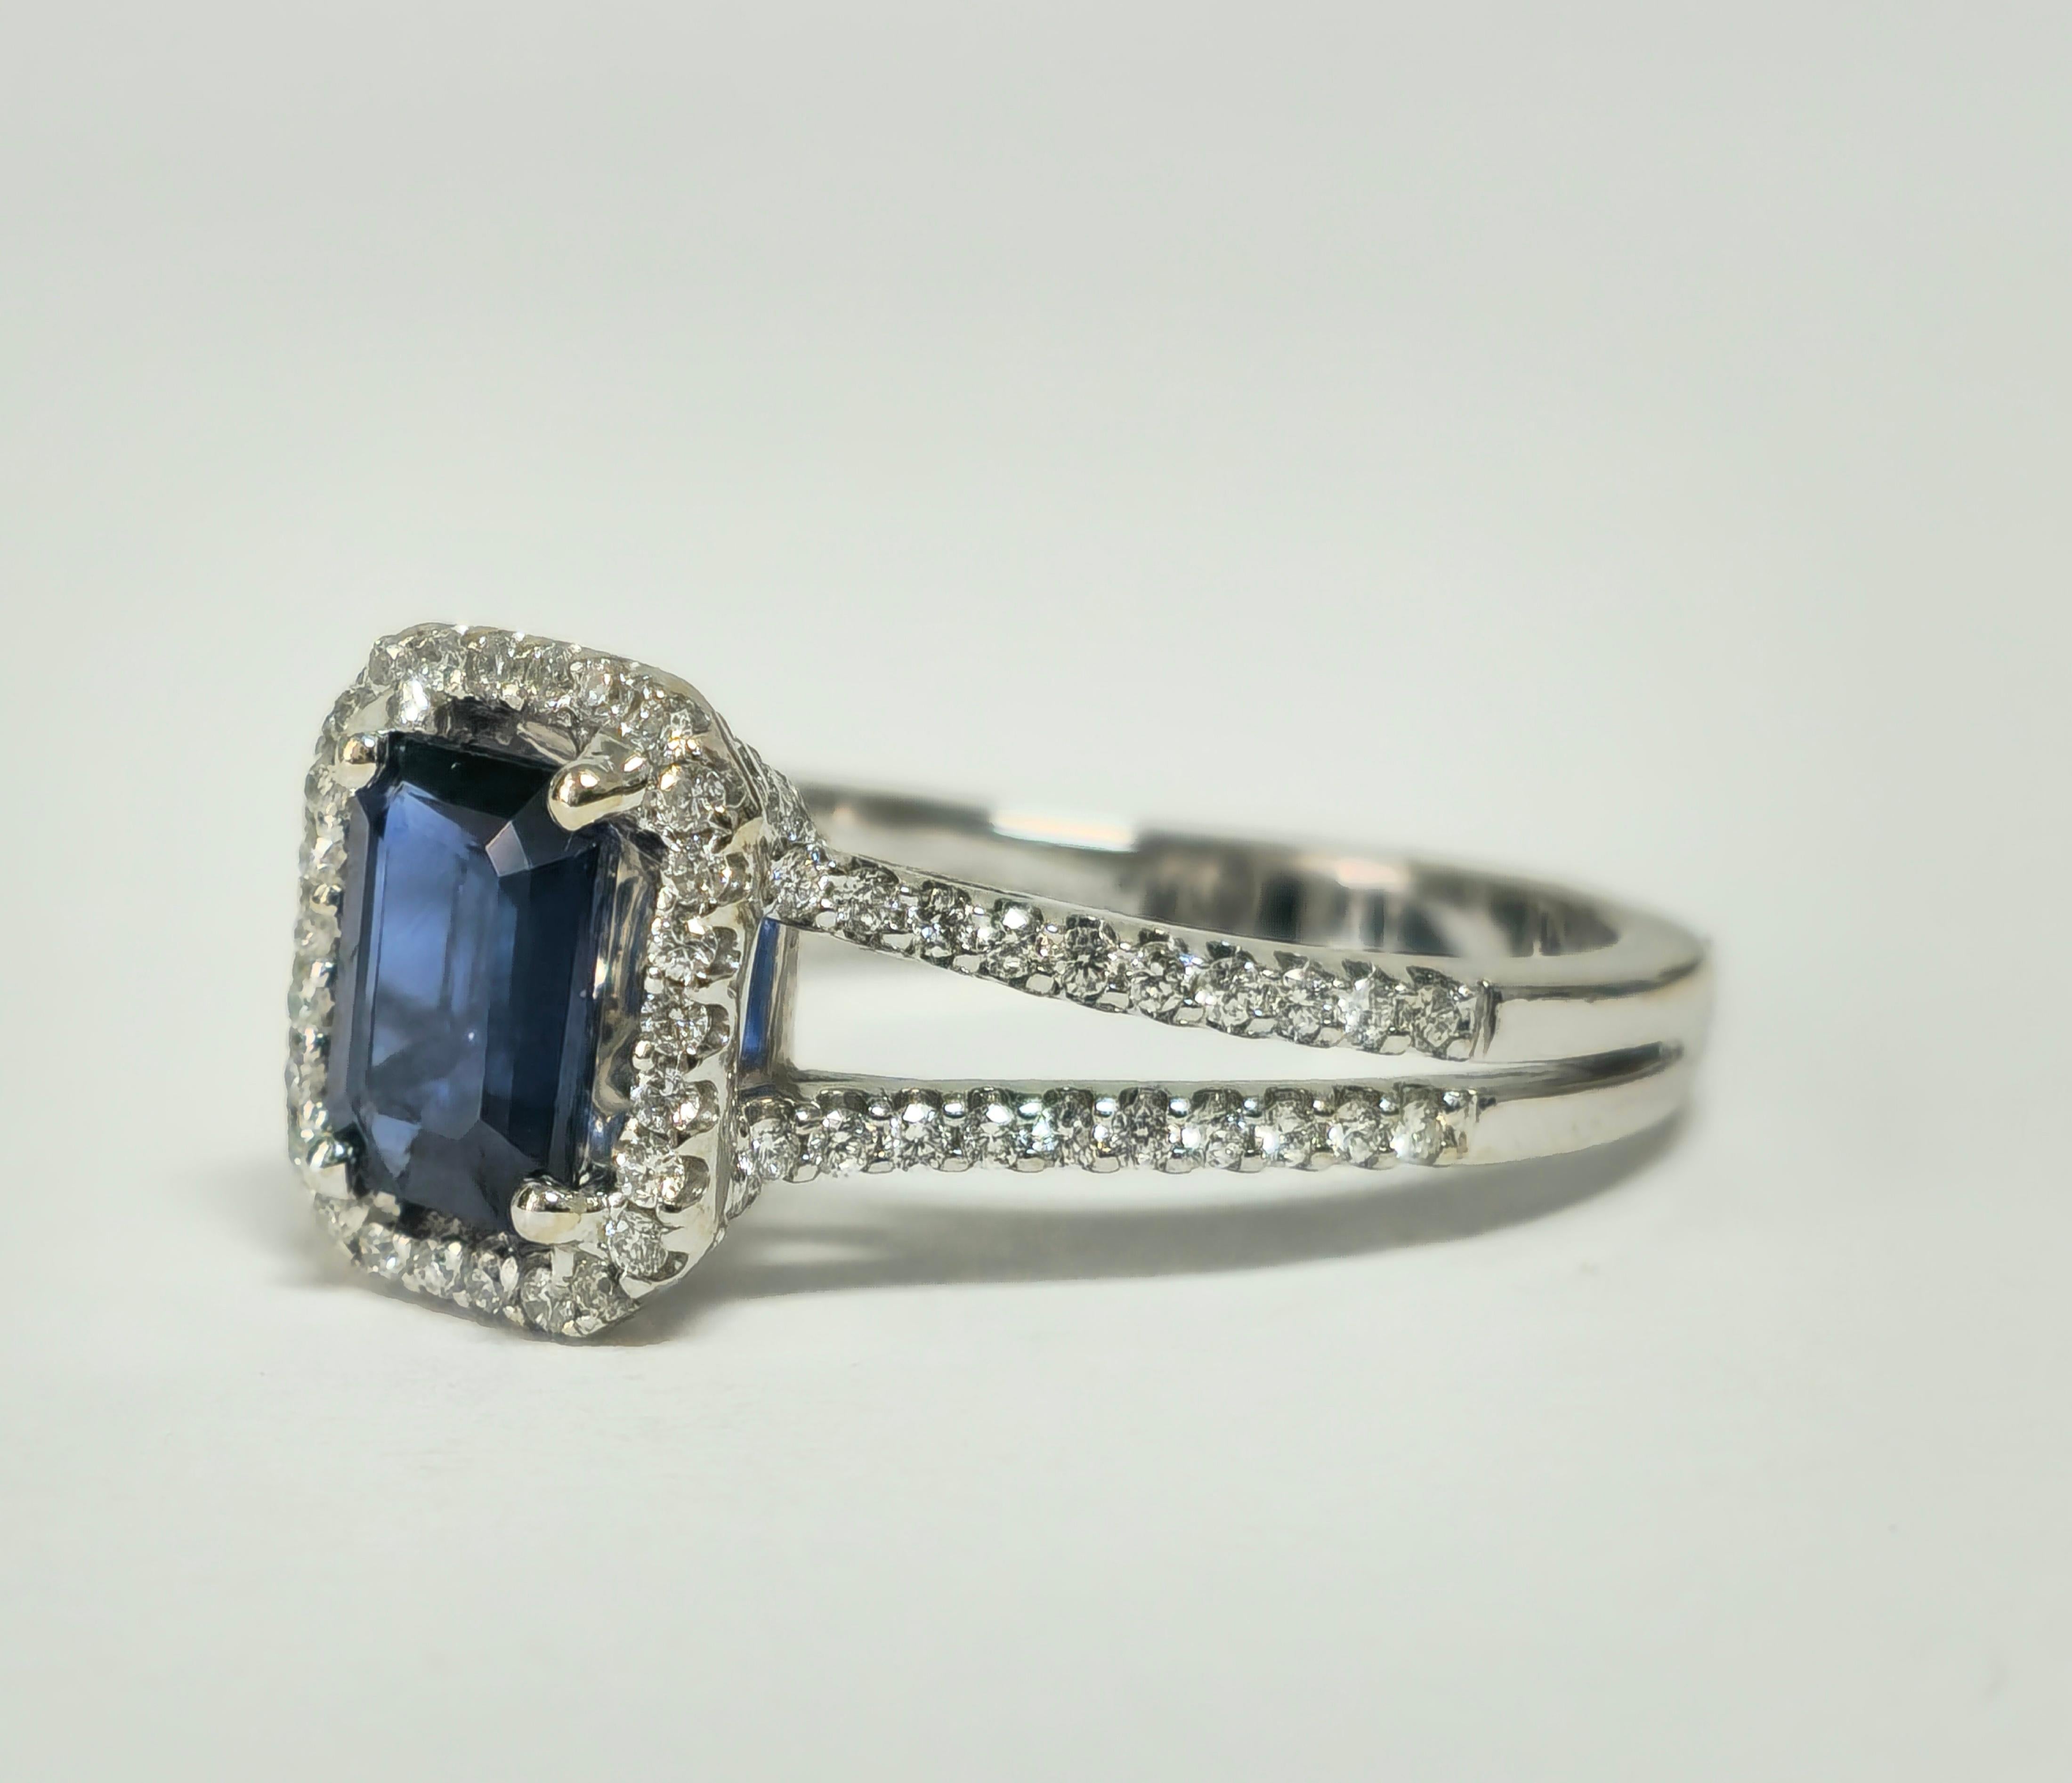 Indulge in sophistication with our Vintage Art Deco Style Blue Sapphire and Diamond Ring, crafted from luxurious 18k white gold. Featuring a stunning 1.00 carat blue sapphire, emerald cut and set in prongs, alongside 1.00 carat of dazzling round